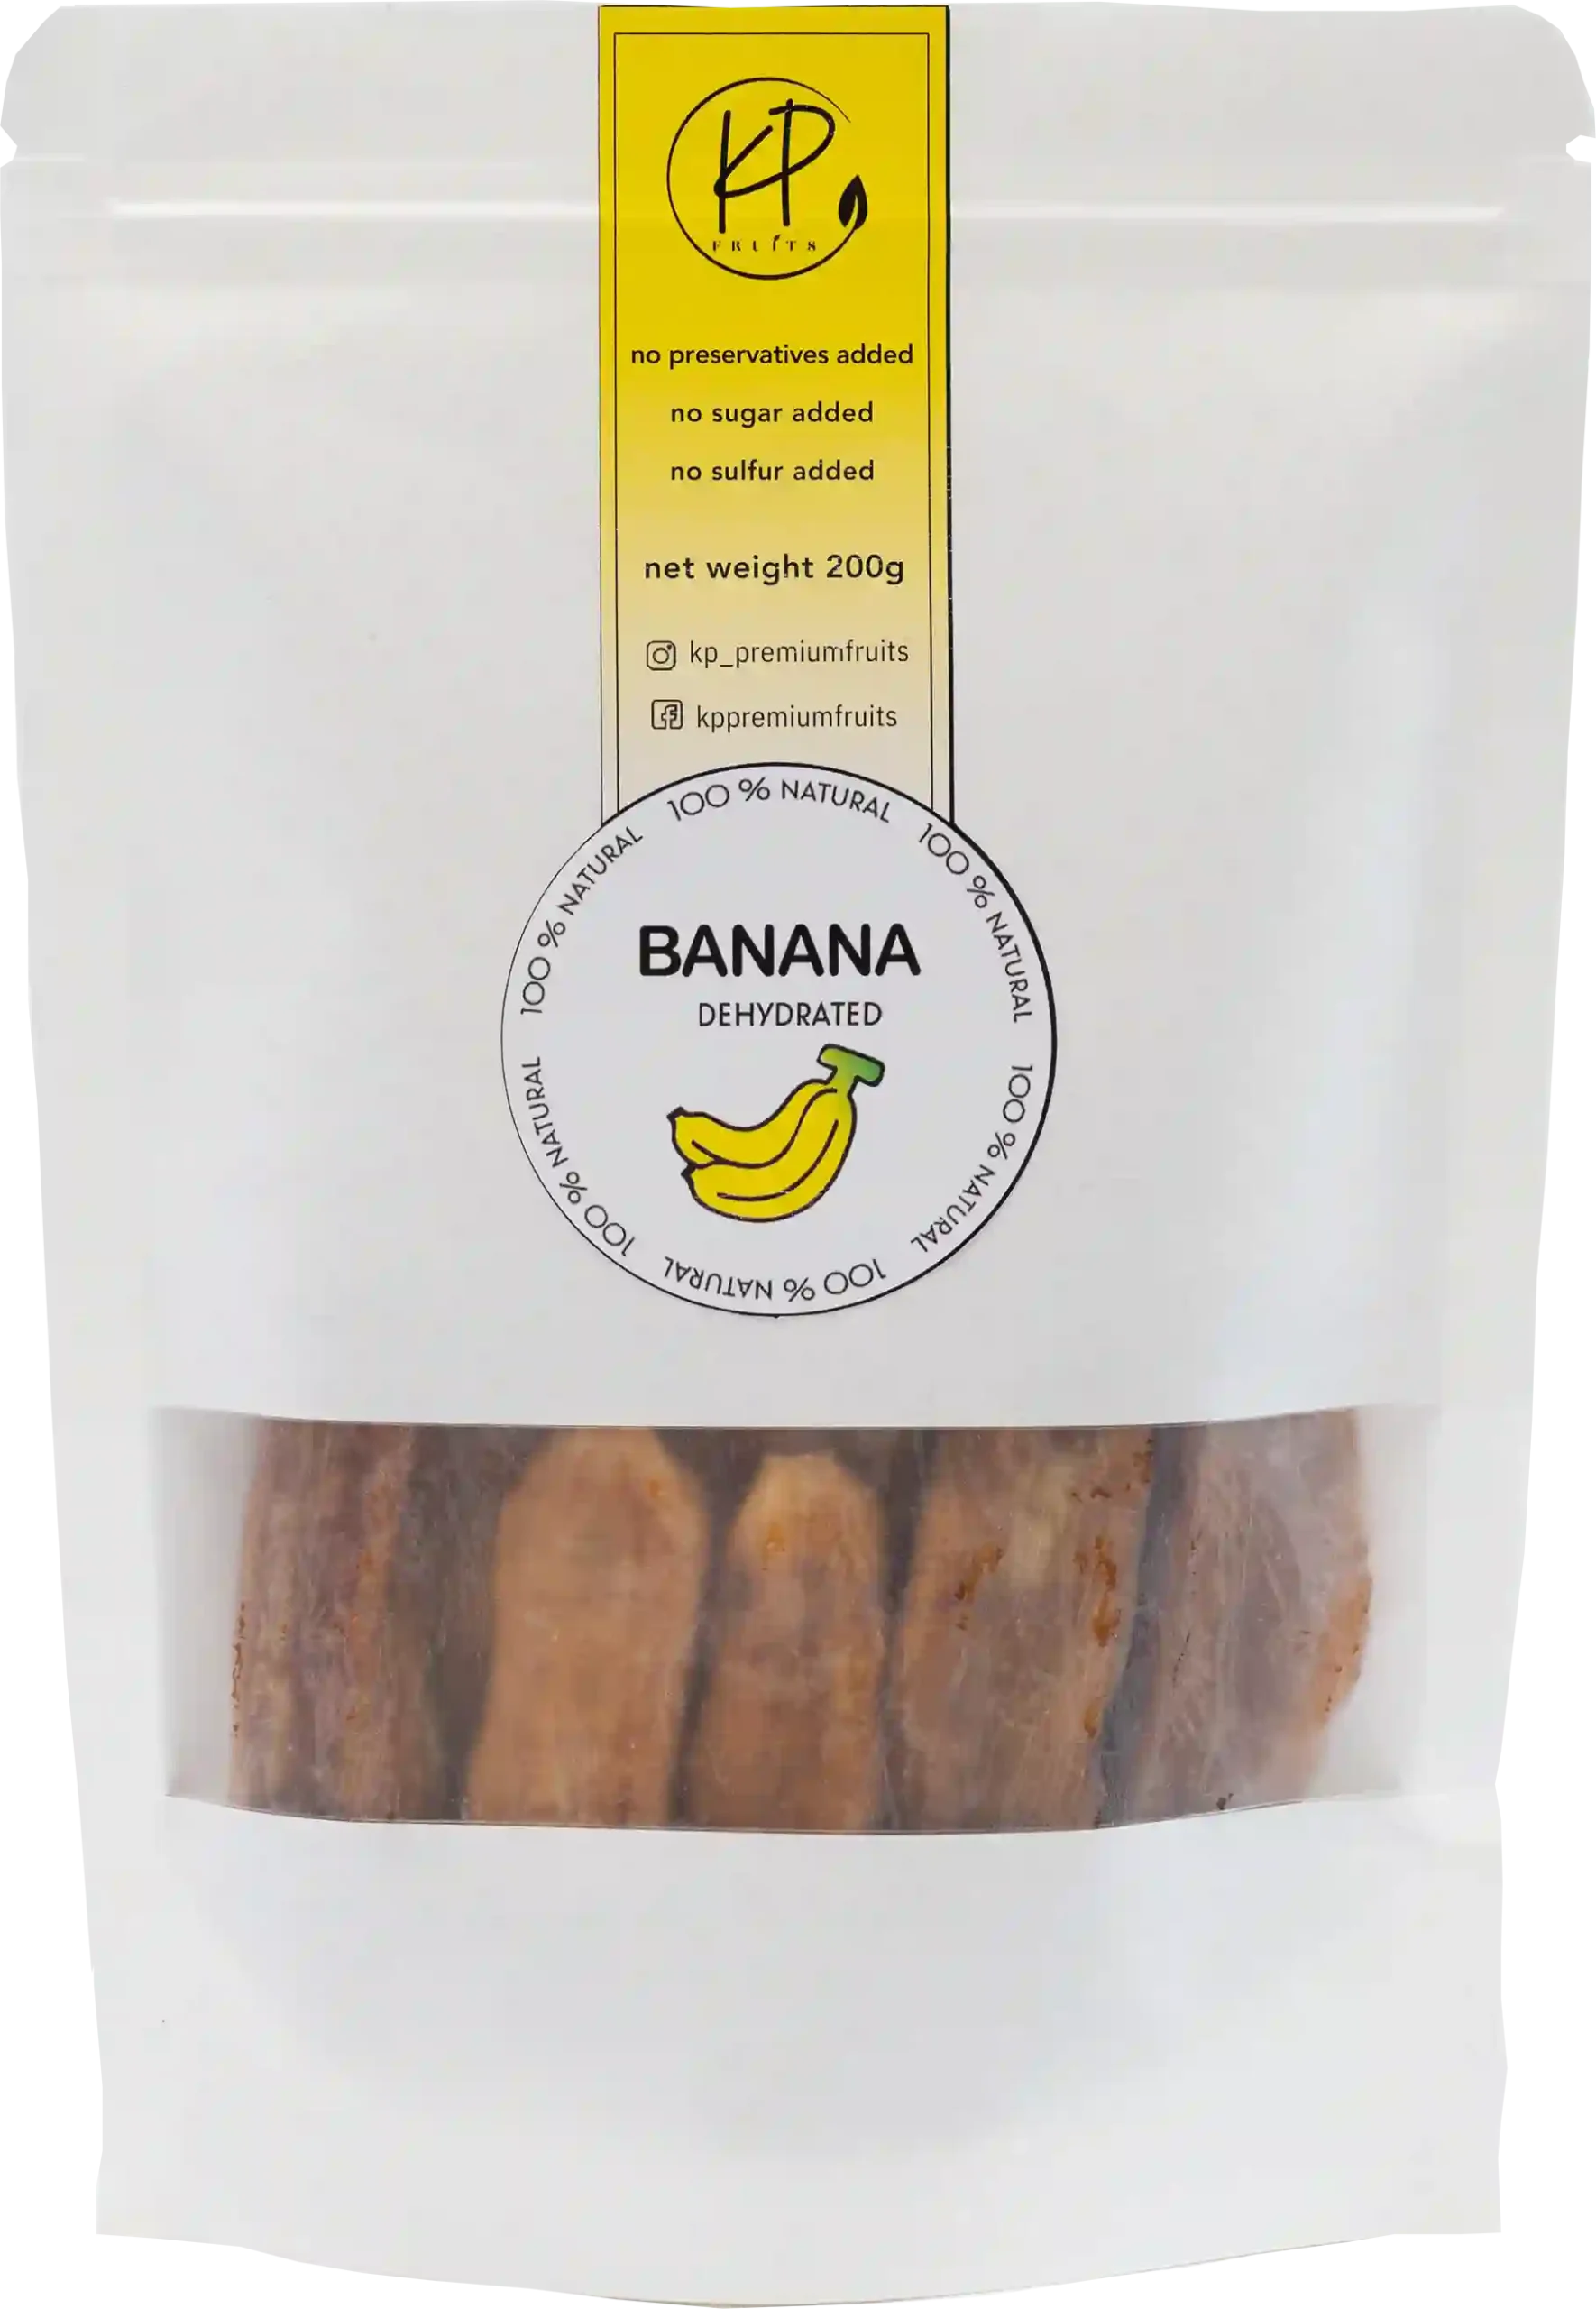 sun dried bananas are a wholesome and flavorful snack, capturing the natural sweetness of bananas with the gentle power of the sun.